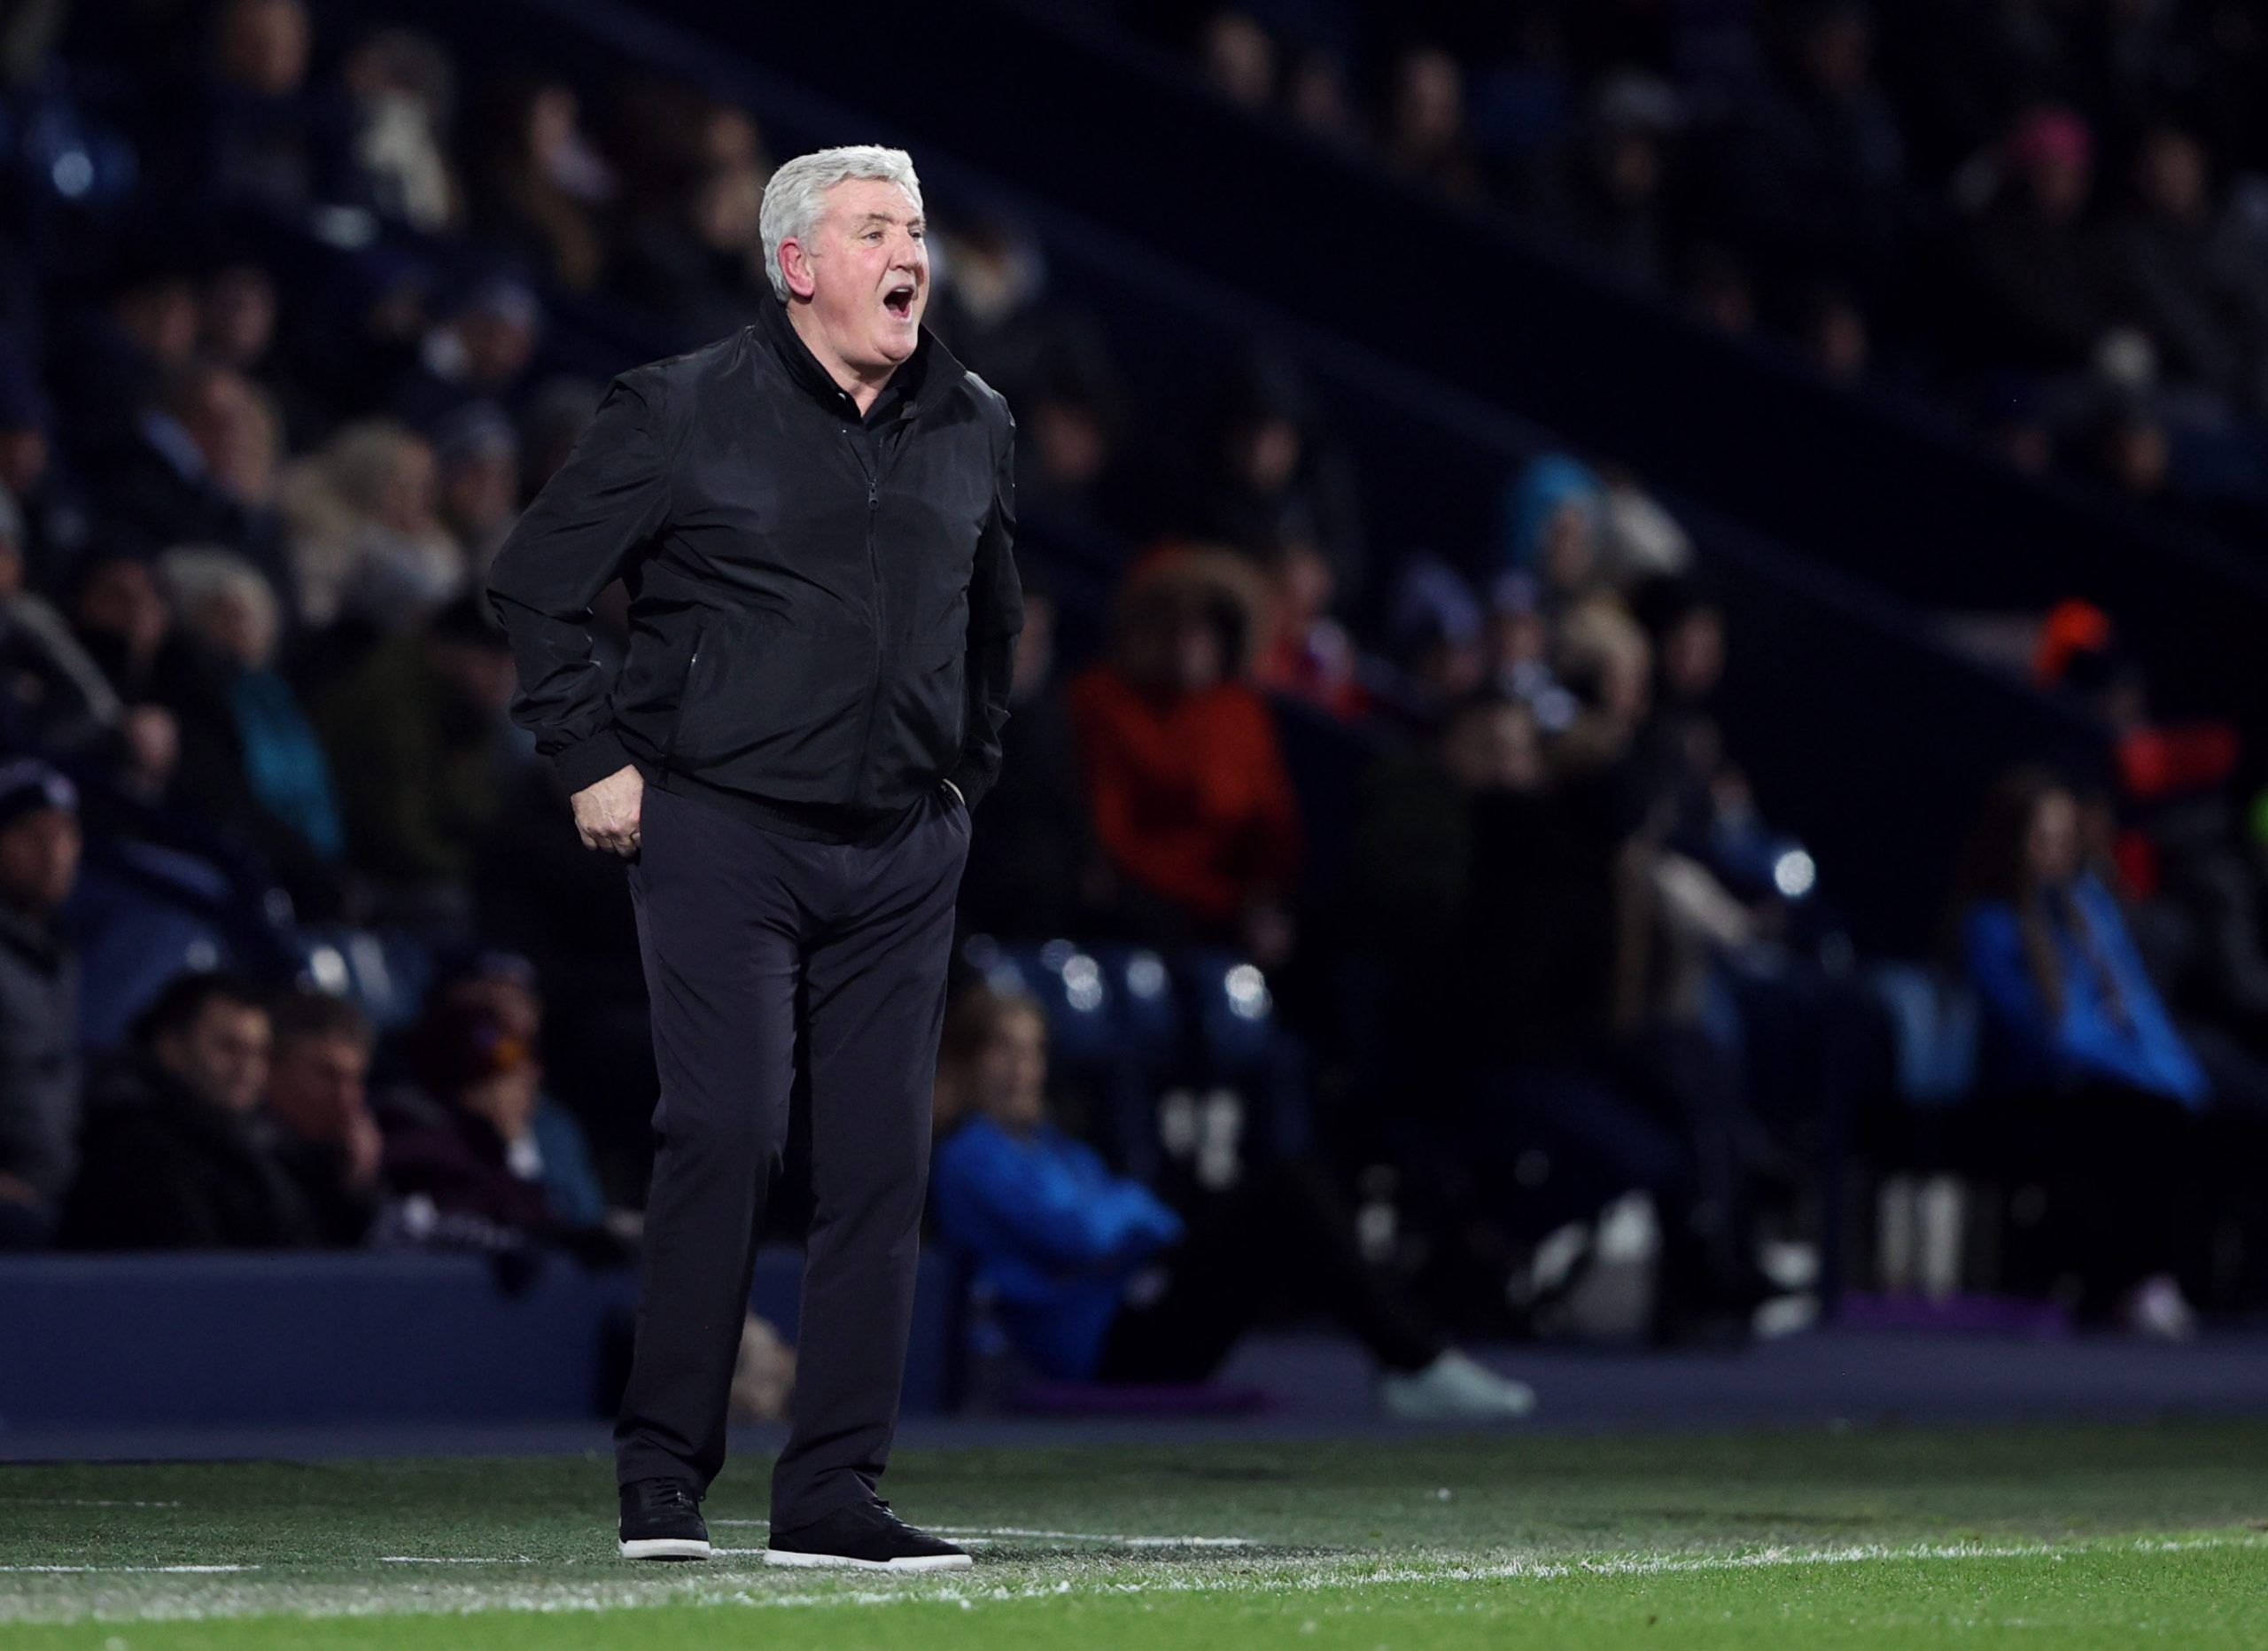 Lai Guochuan, WBA, WBA News, West Brom, West Brom news, West Brom update, West Bromwich Albion, Hawthorns, Baggies, Championship, Championship news, Steve Bruce, West Brom transfer, Luke Dowling, Transfer Focus, Reyes Cleary, The Athletic, 
